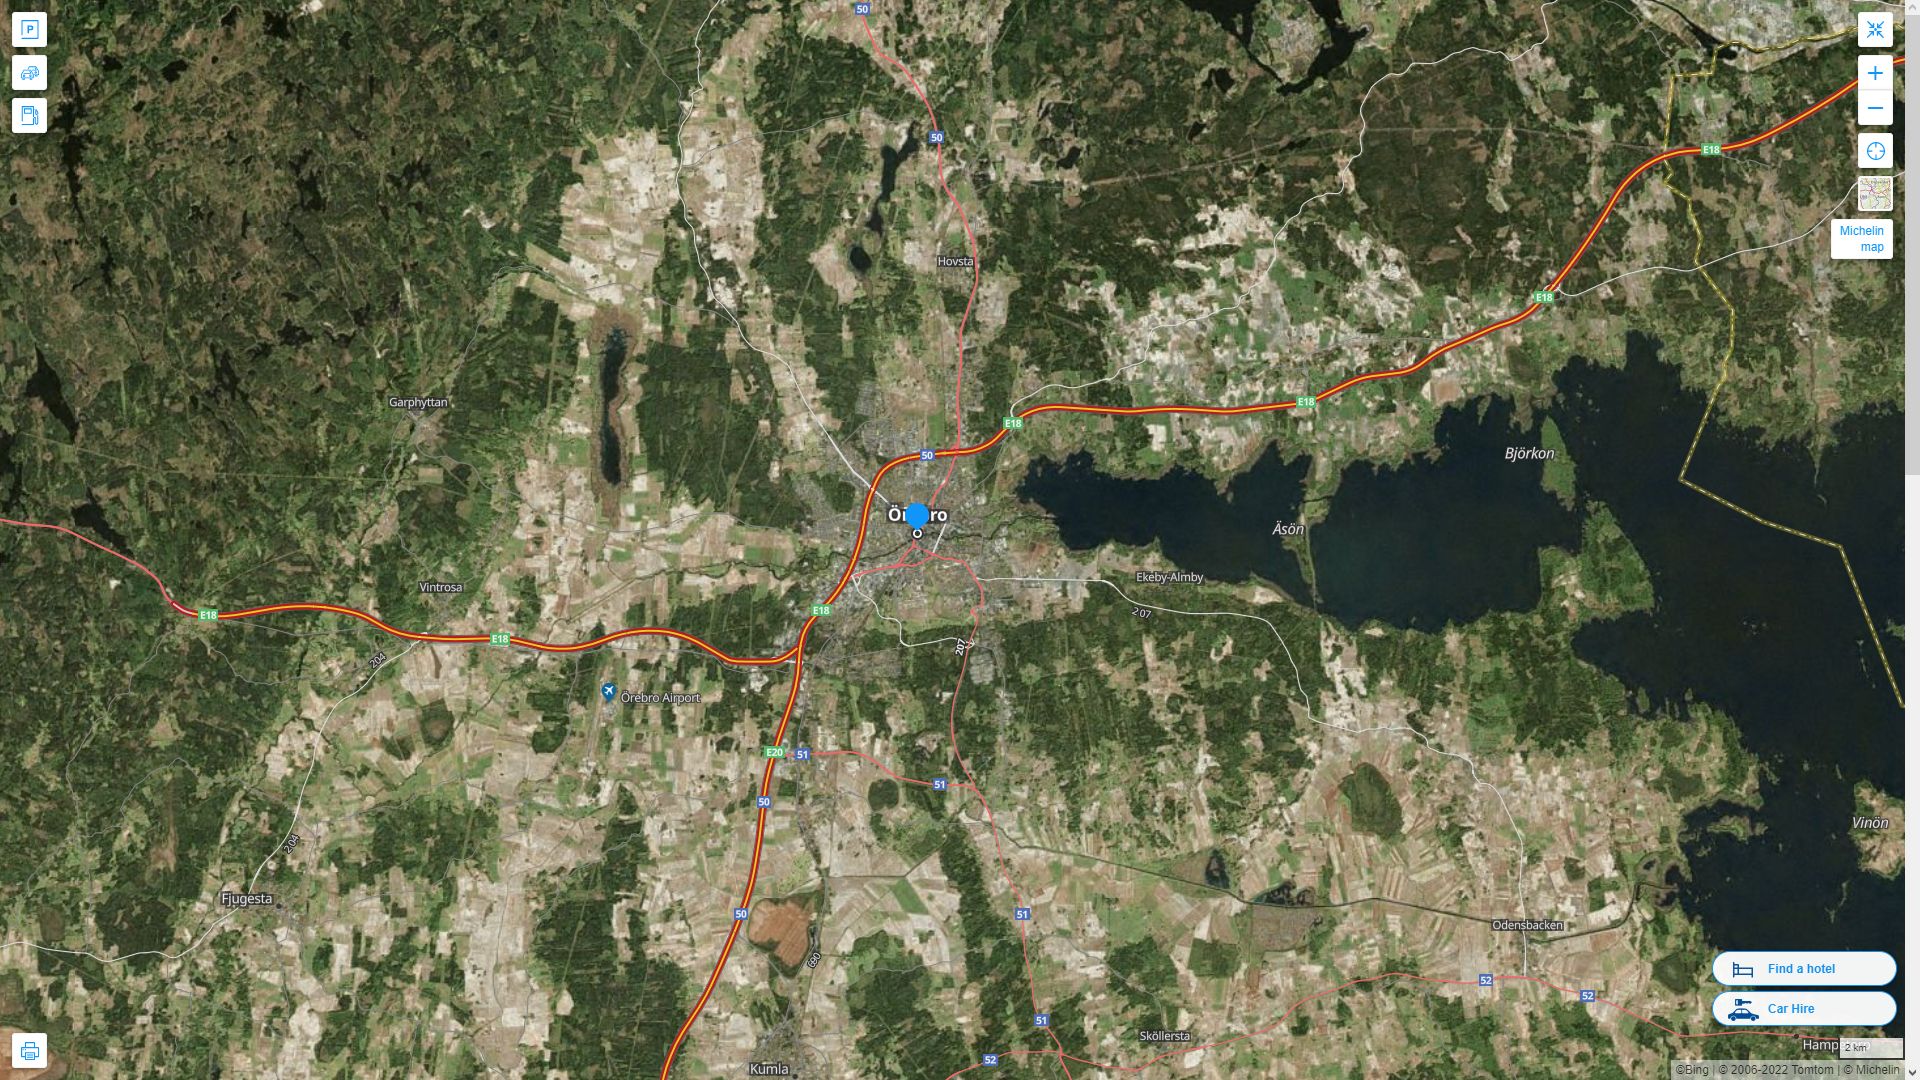 Orebro Highway and Road Map with Satellite View